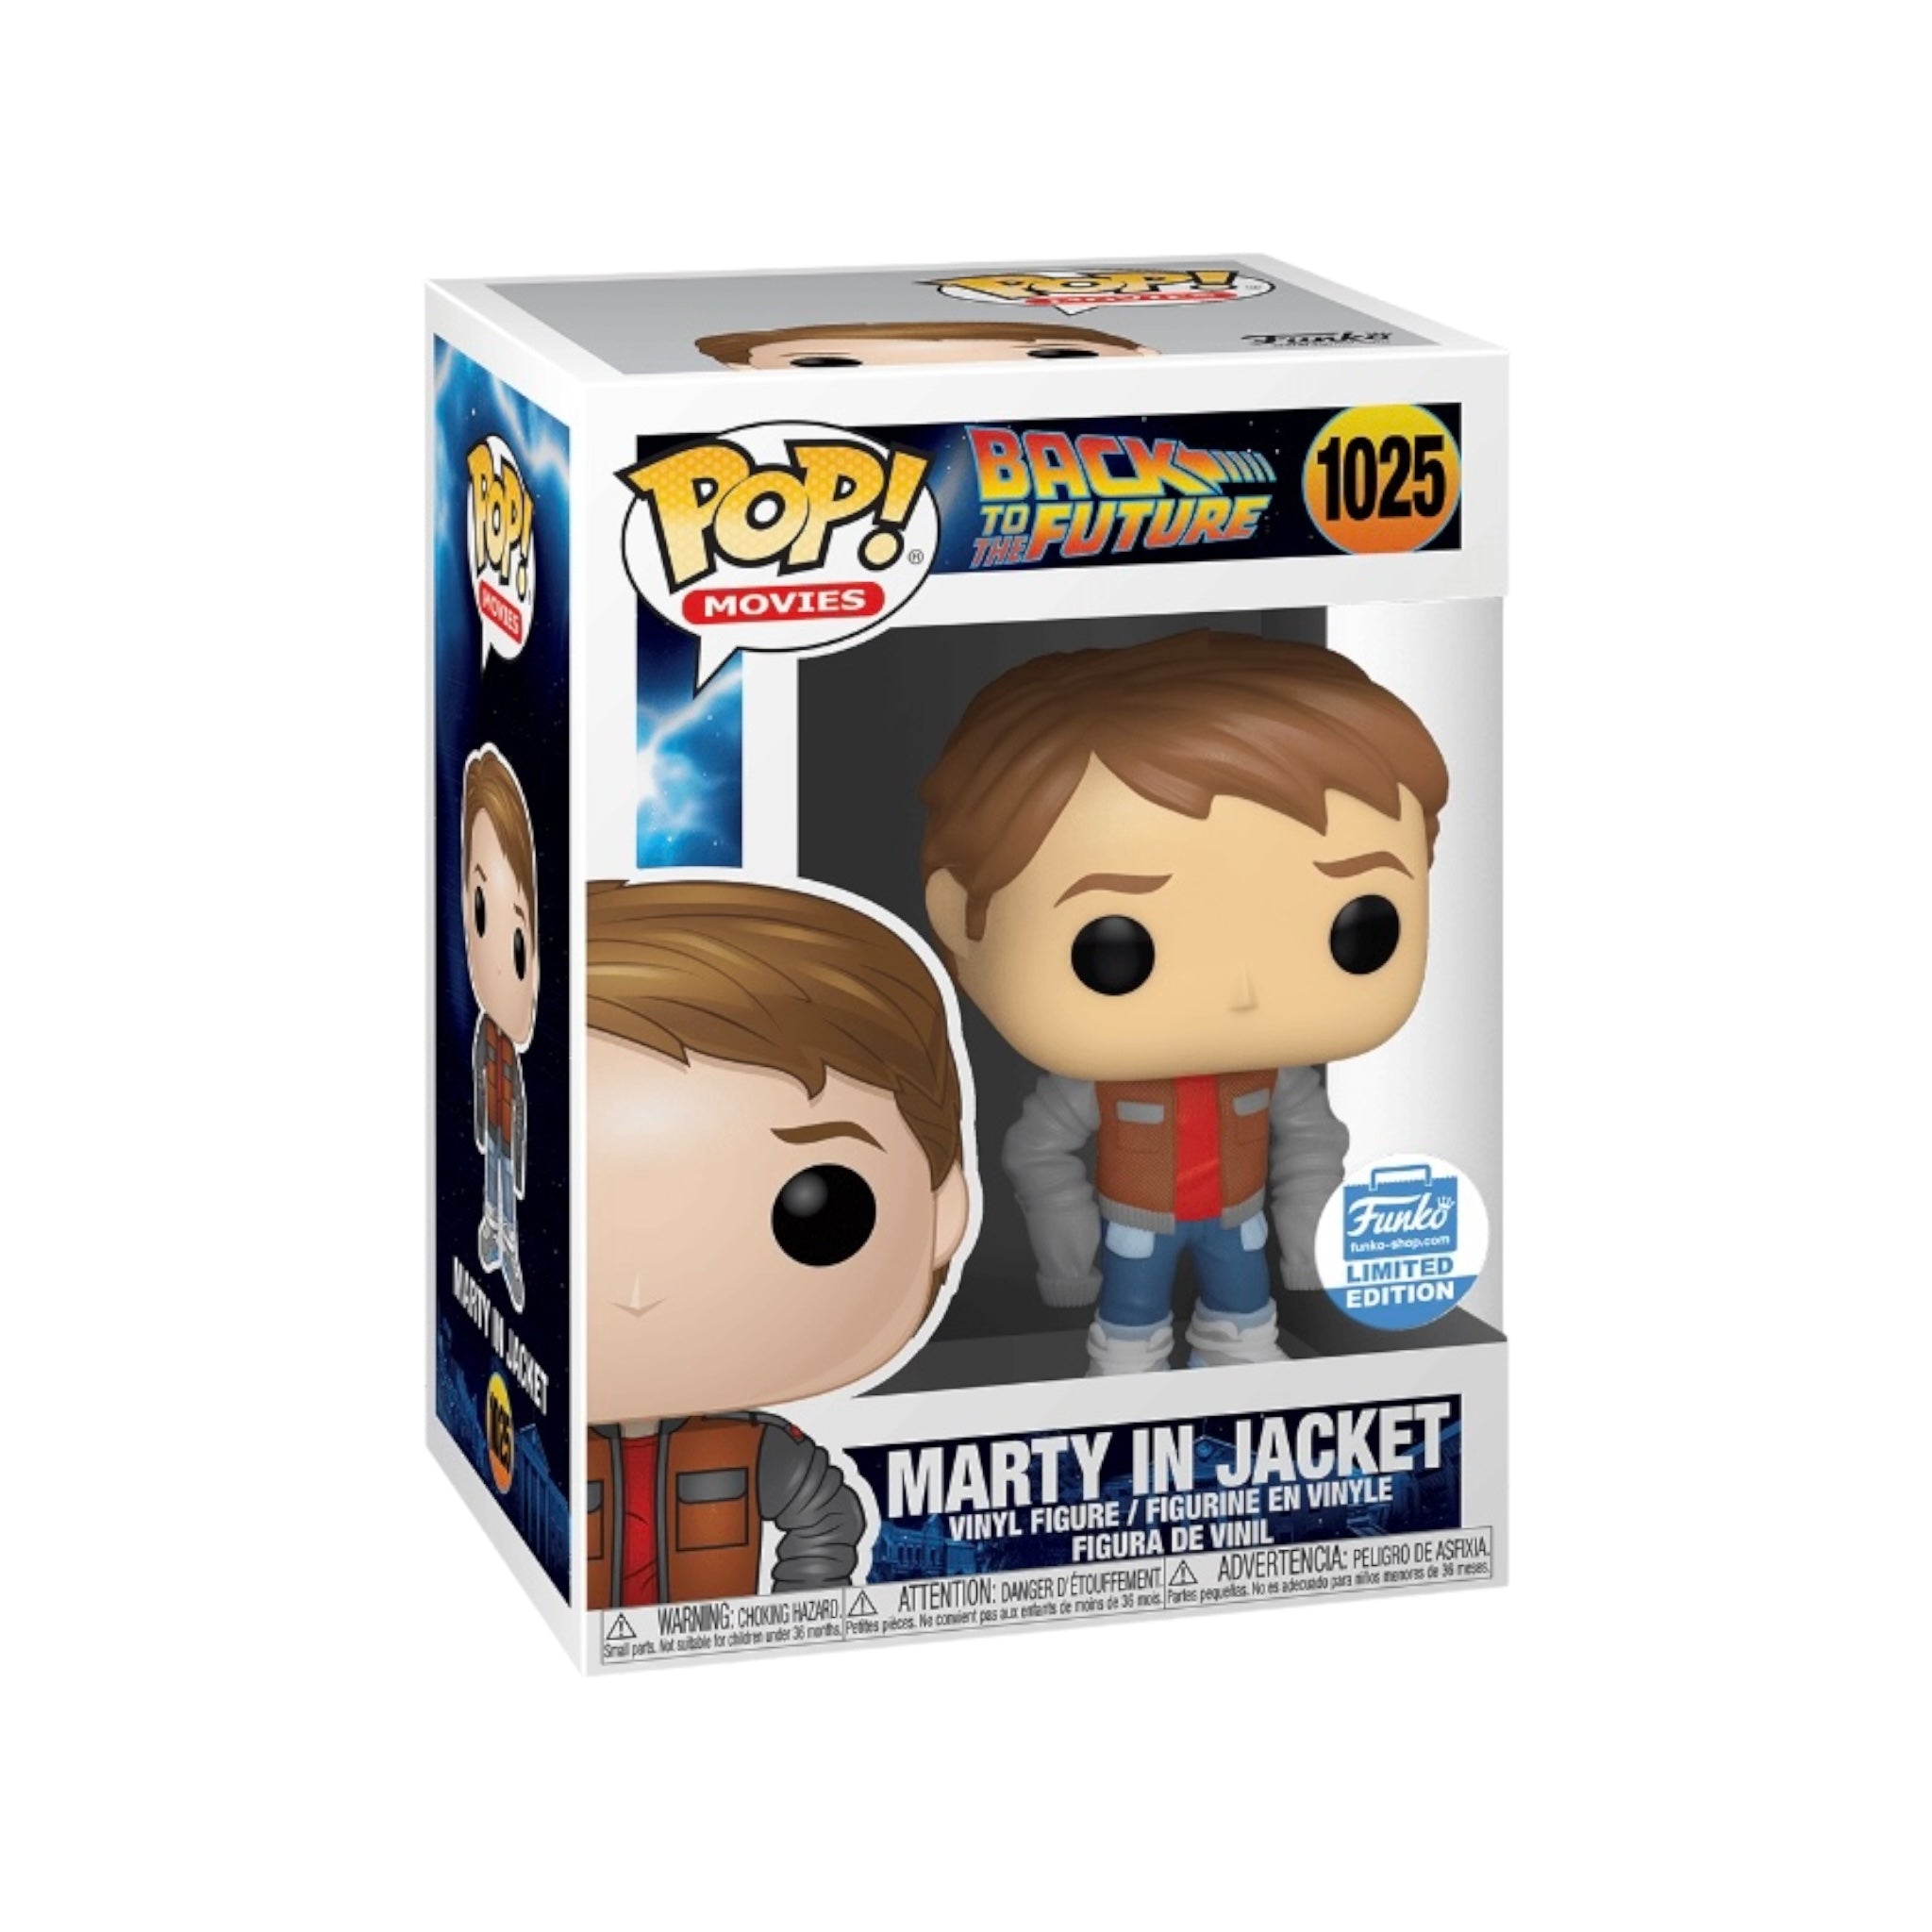 Marty in Jacket #1025 Funko Pop! - Back to The Future - Funko Shop Exclusive